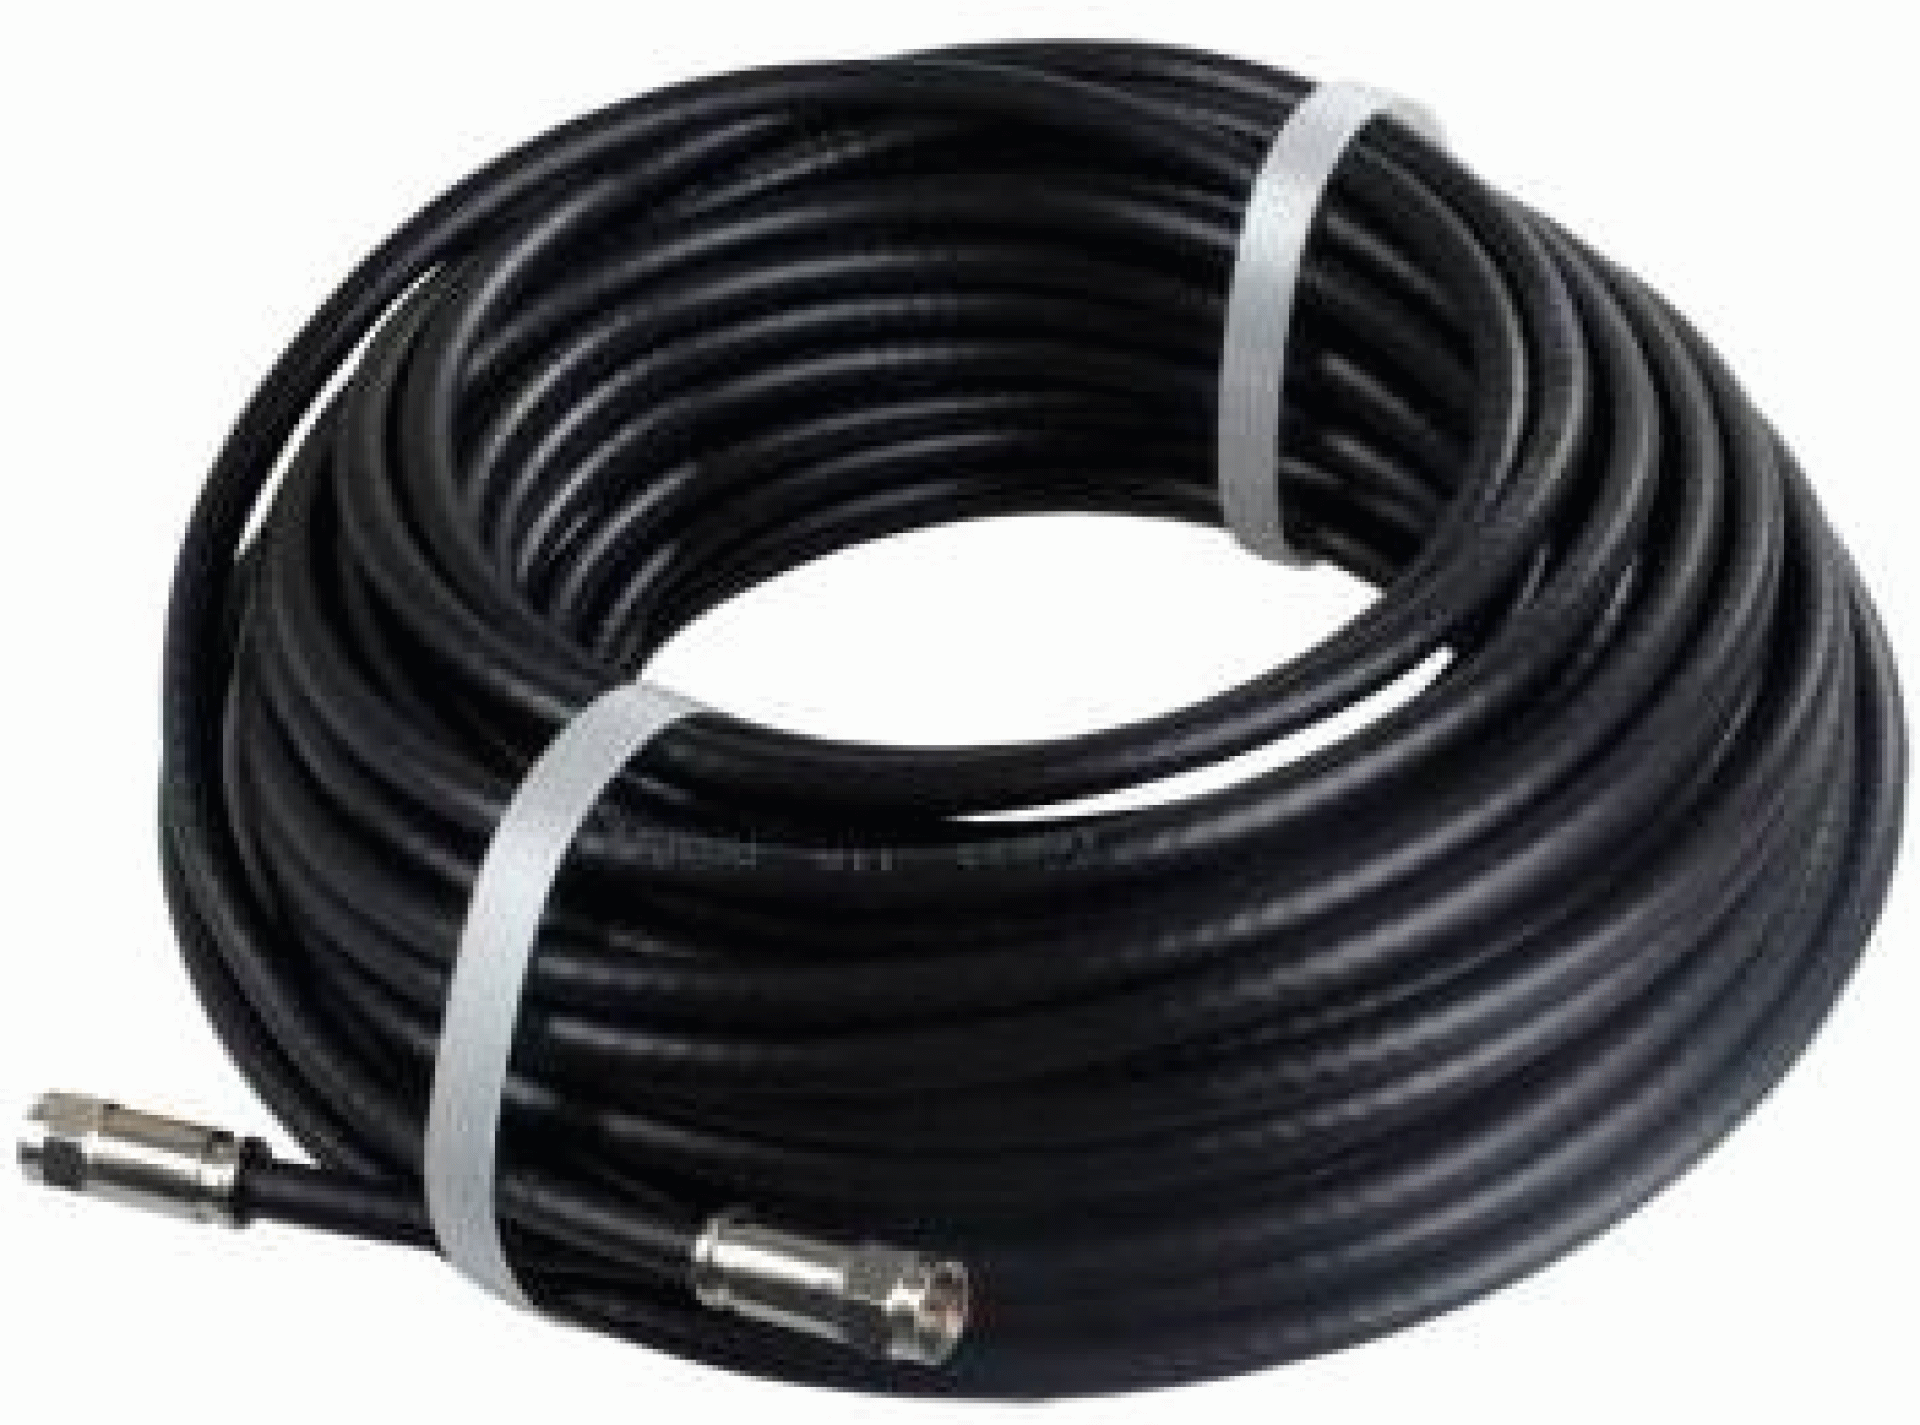 J R PRODUCTS | 47995 | 75' RG6 COAX W/ COMPRESSION ENDS